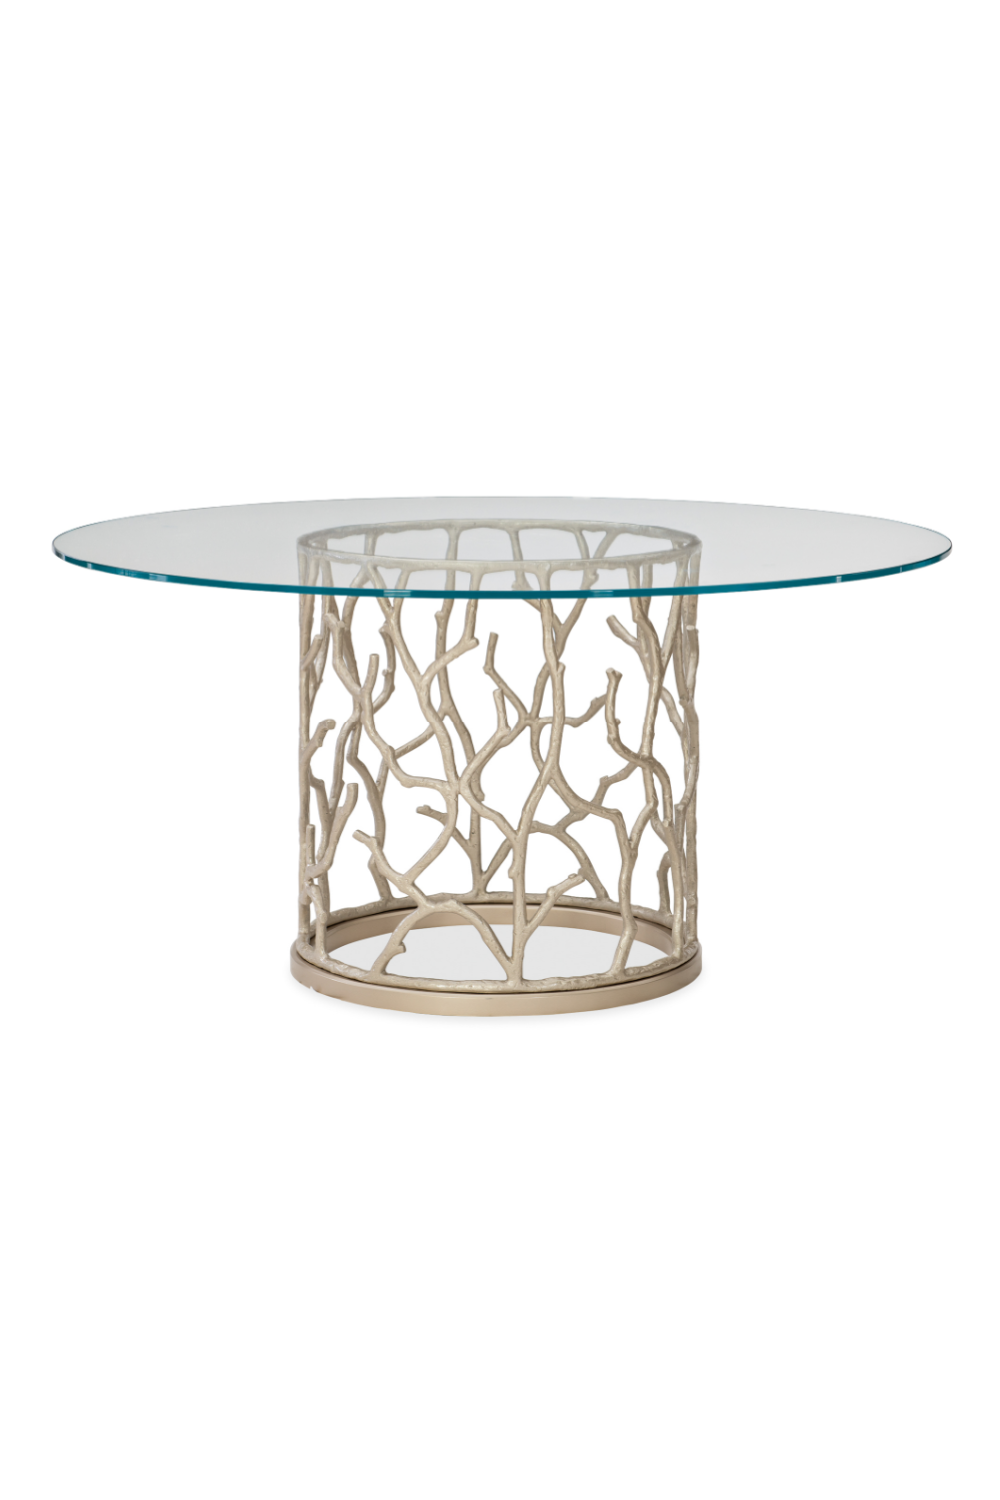 Round Glass Modern Dining Table | Caracole Around The Reef | Oroa.com